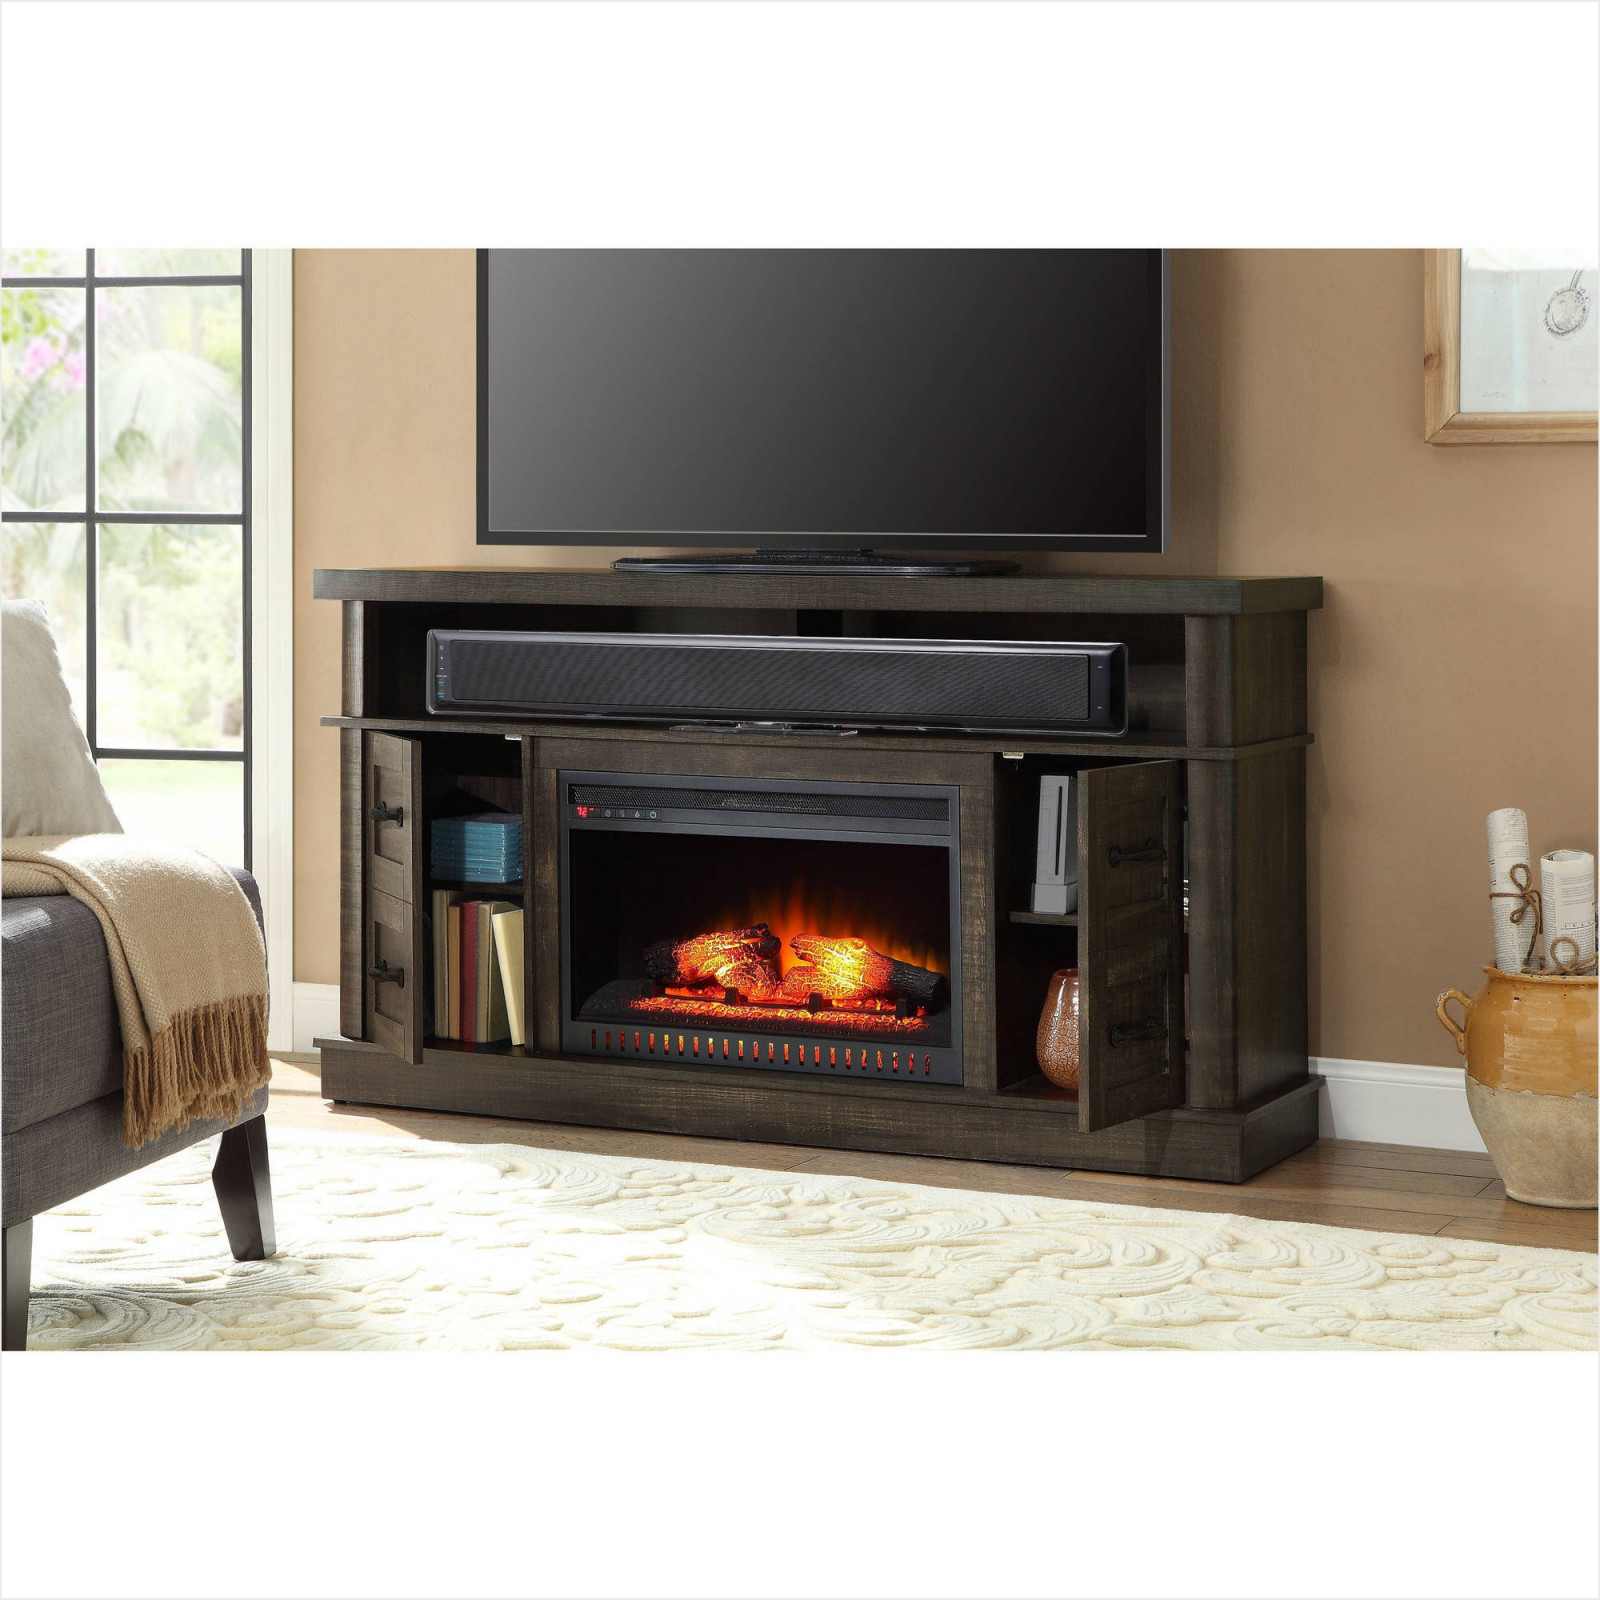 60 Electric Fireplace Unique 35 Minimaliste Electric Fireplace Tv Stand